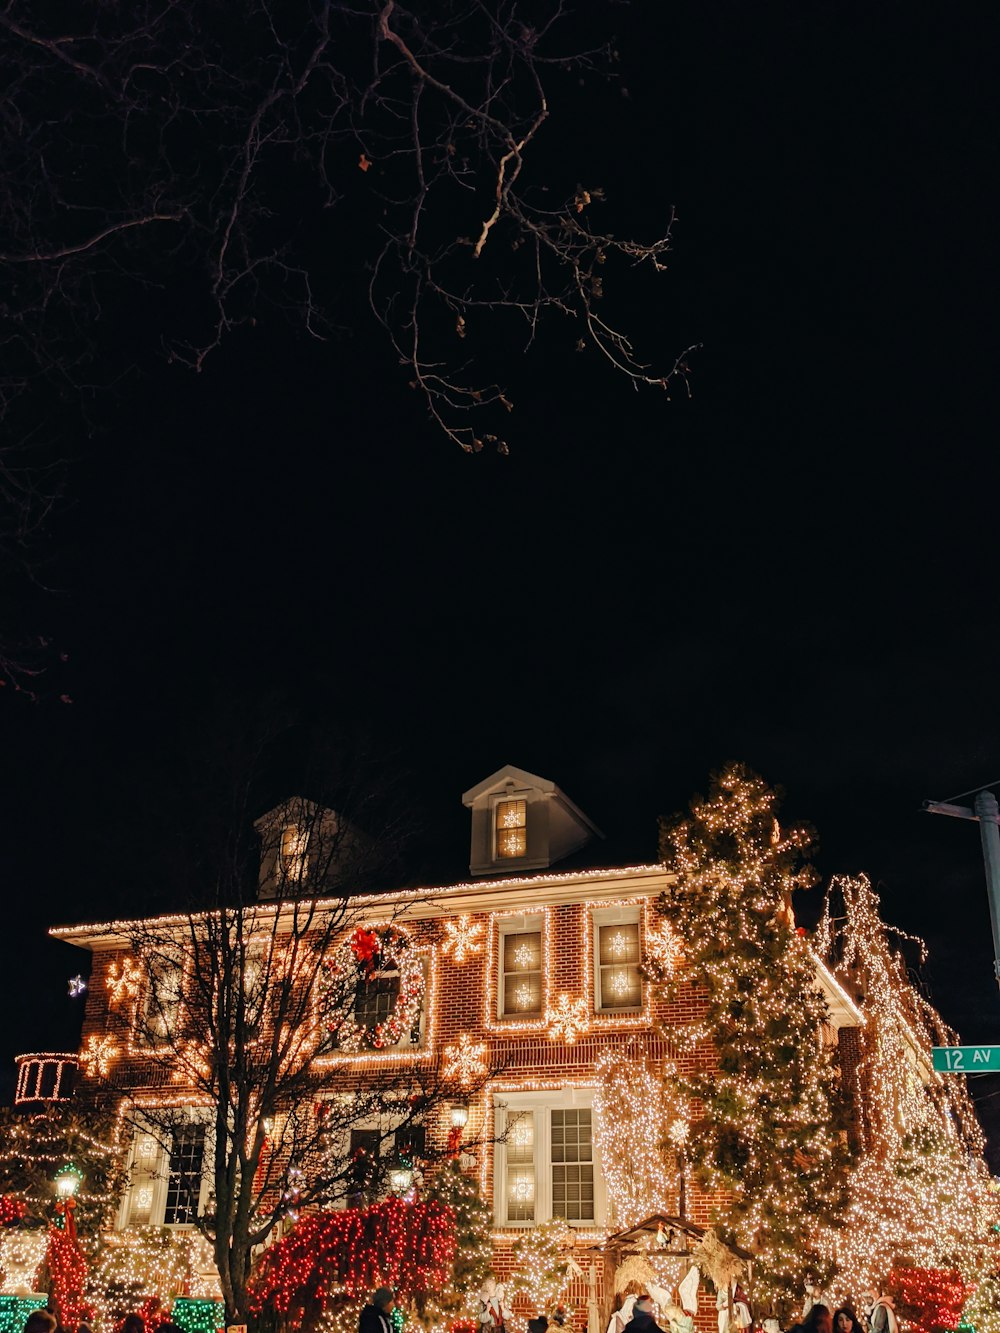 Prep for holiday season with well-lit house at night